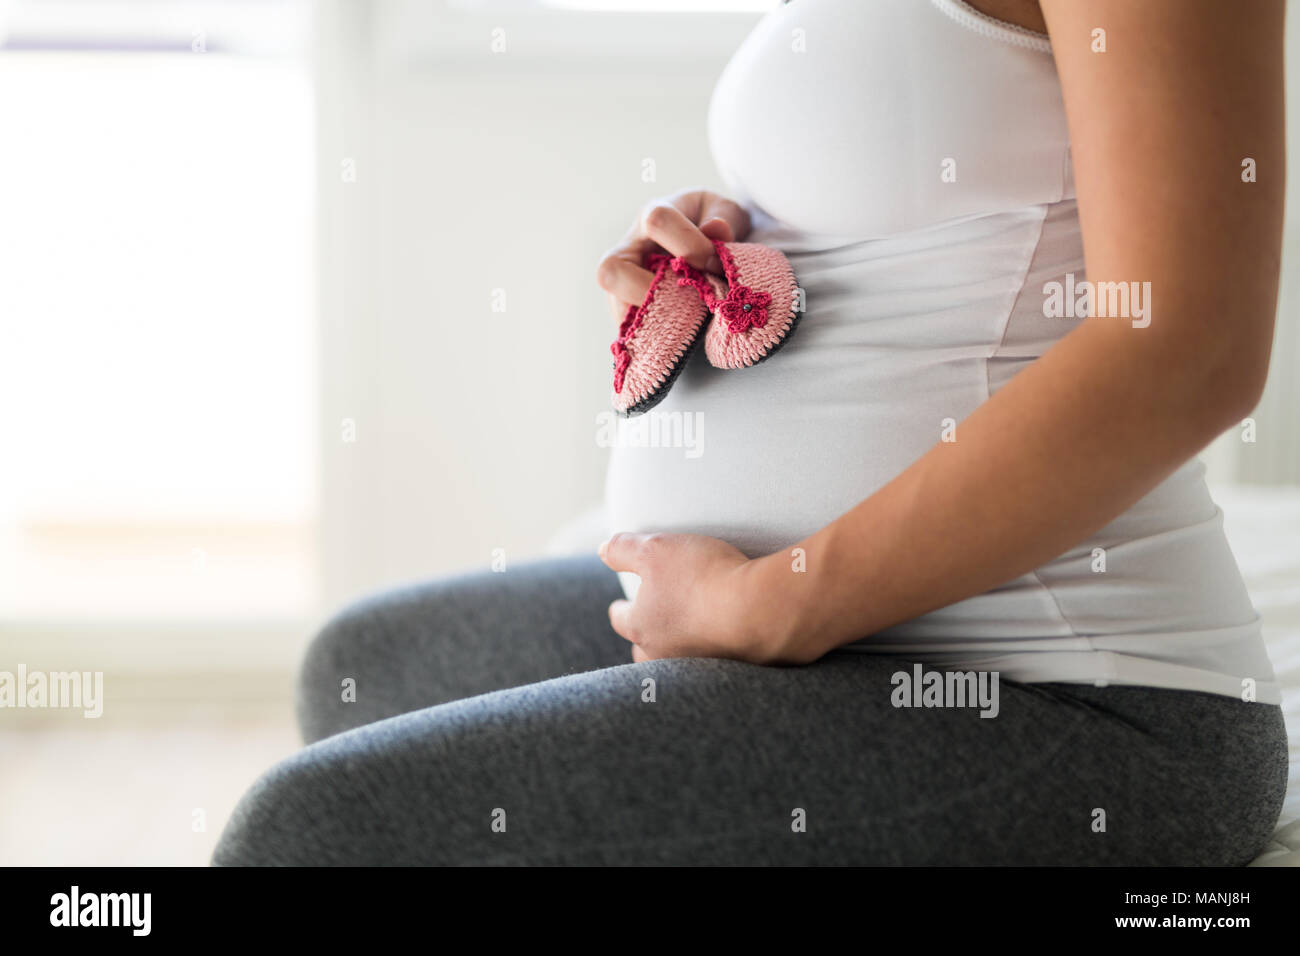 Pregnant woman holding baby shoes on her belly Stock Photo